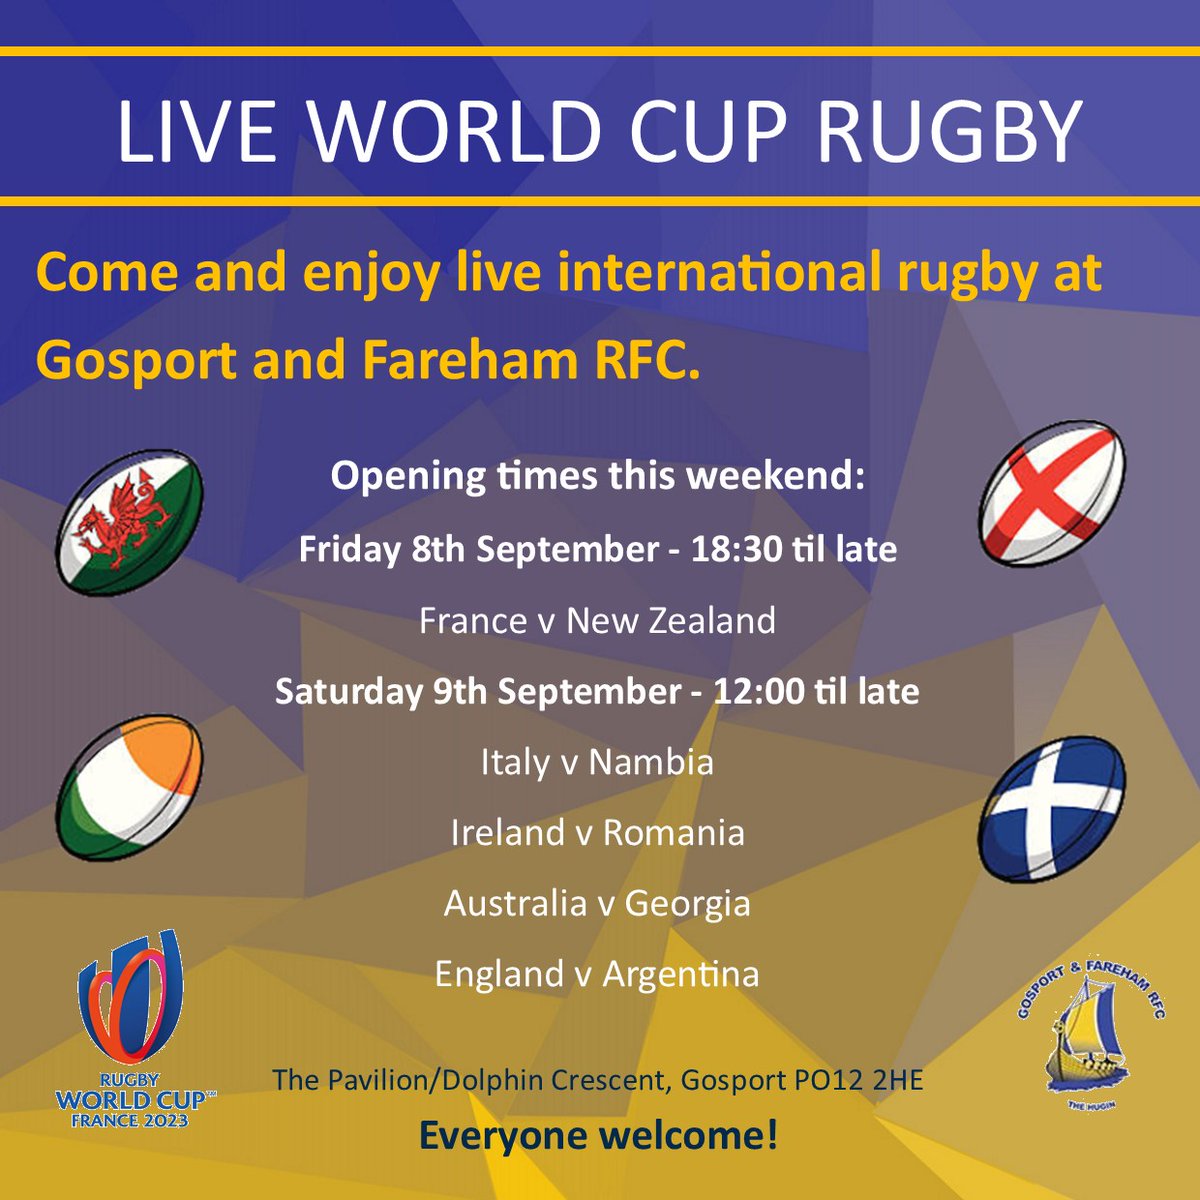 Where will you be watching the opening weekend of the Rugby World Cup? Come and join us over at Gosport and Fareham RFC! We'll be open at the times shown and everyone is welcome 🏉🏆 #rwc2023 #worldcup #rugbyworldcup2023france #rugbyfamily